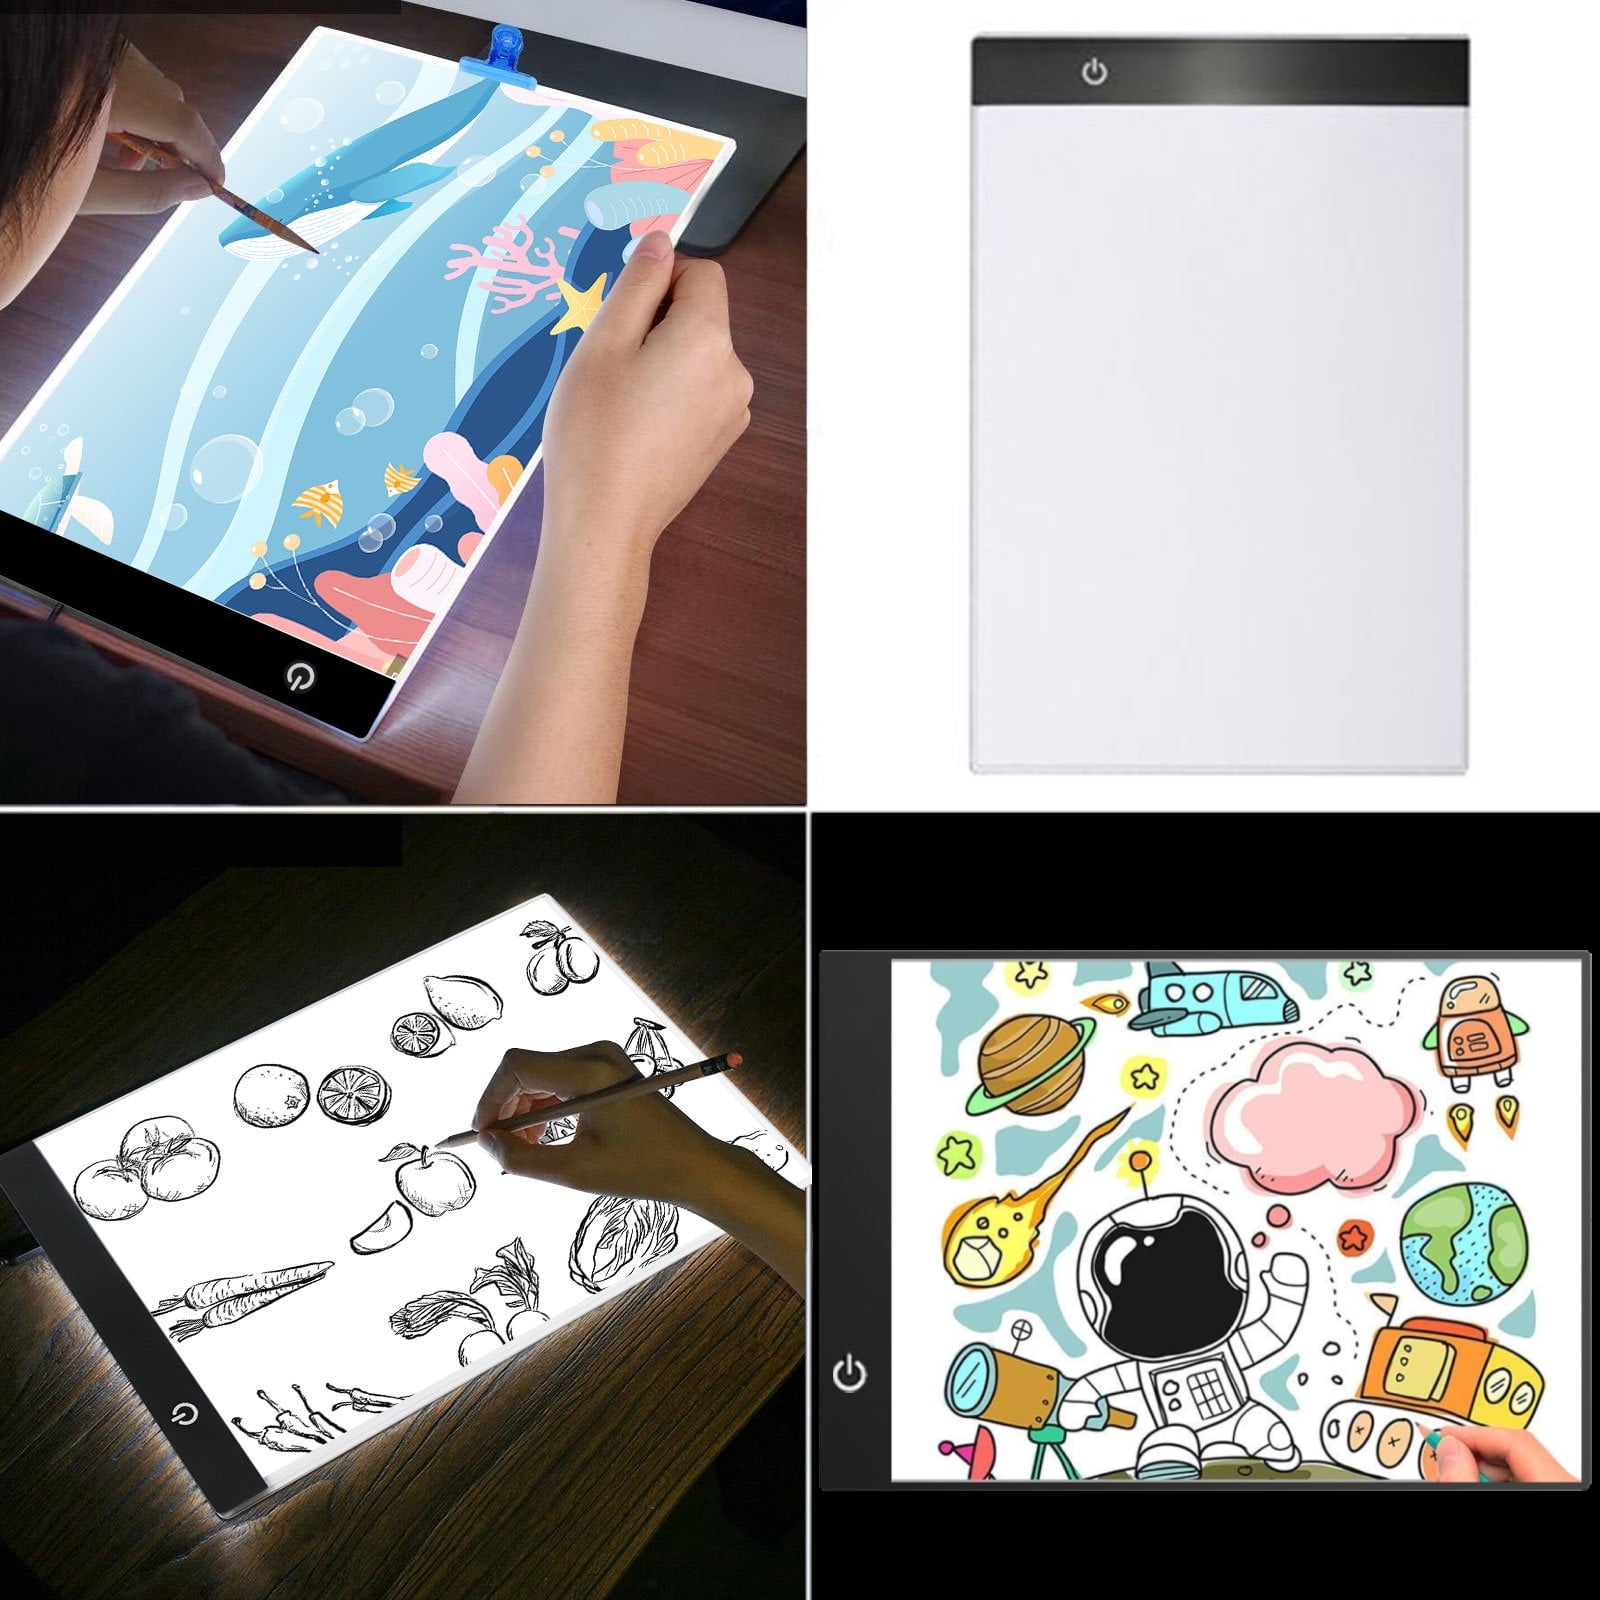 A4 LED Tracing Light Box, TSV Slim LED Light Pad Tracer for Drawing, 2D  Animation, Sketching, X-ray Viewing, USB Powered